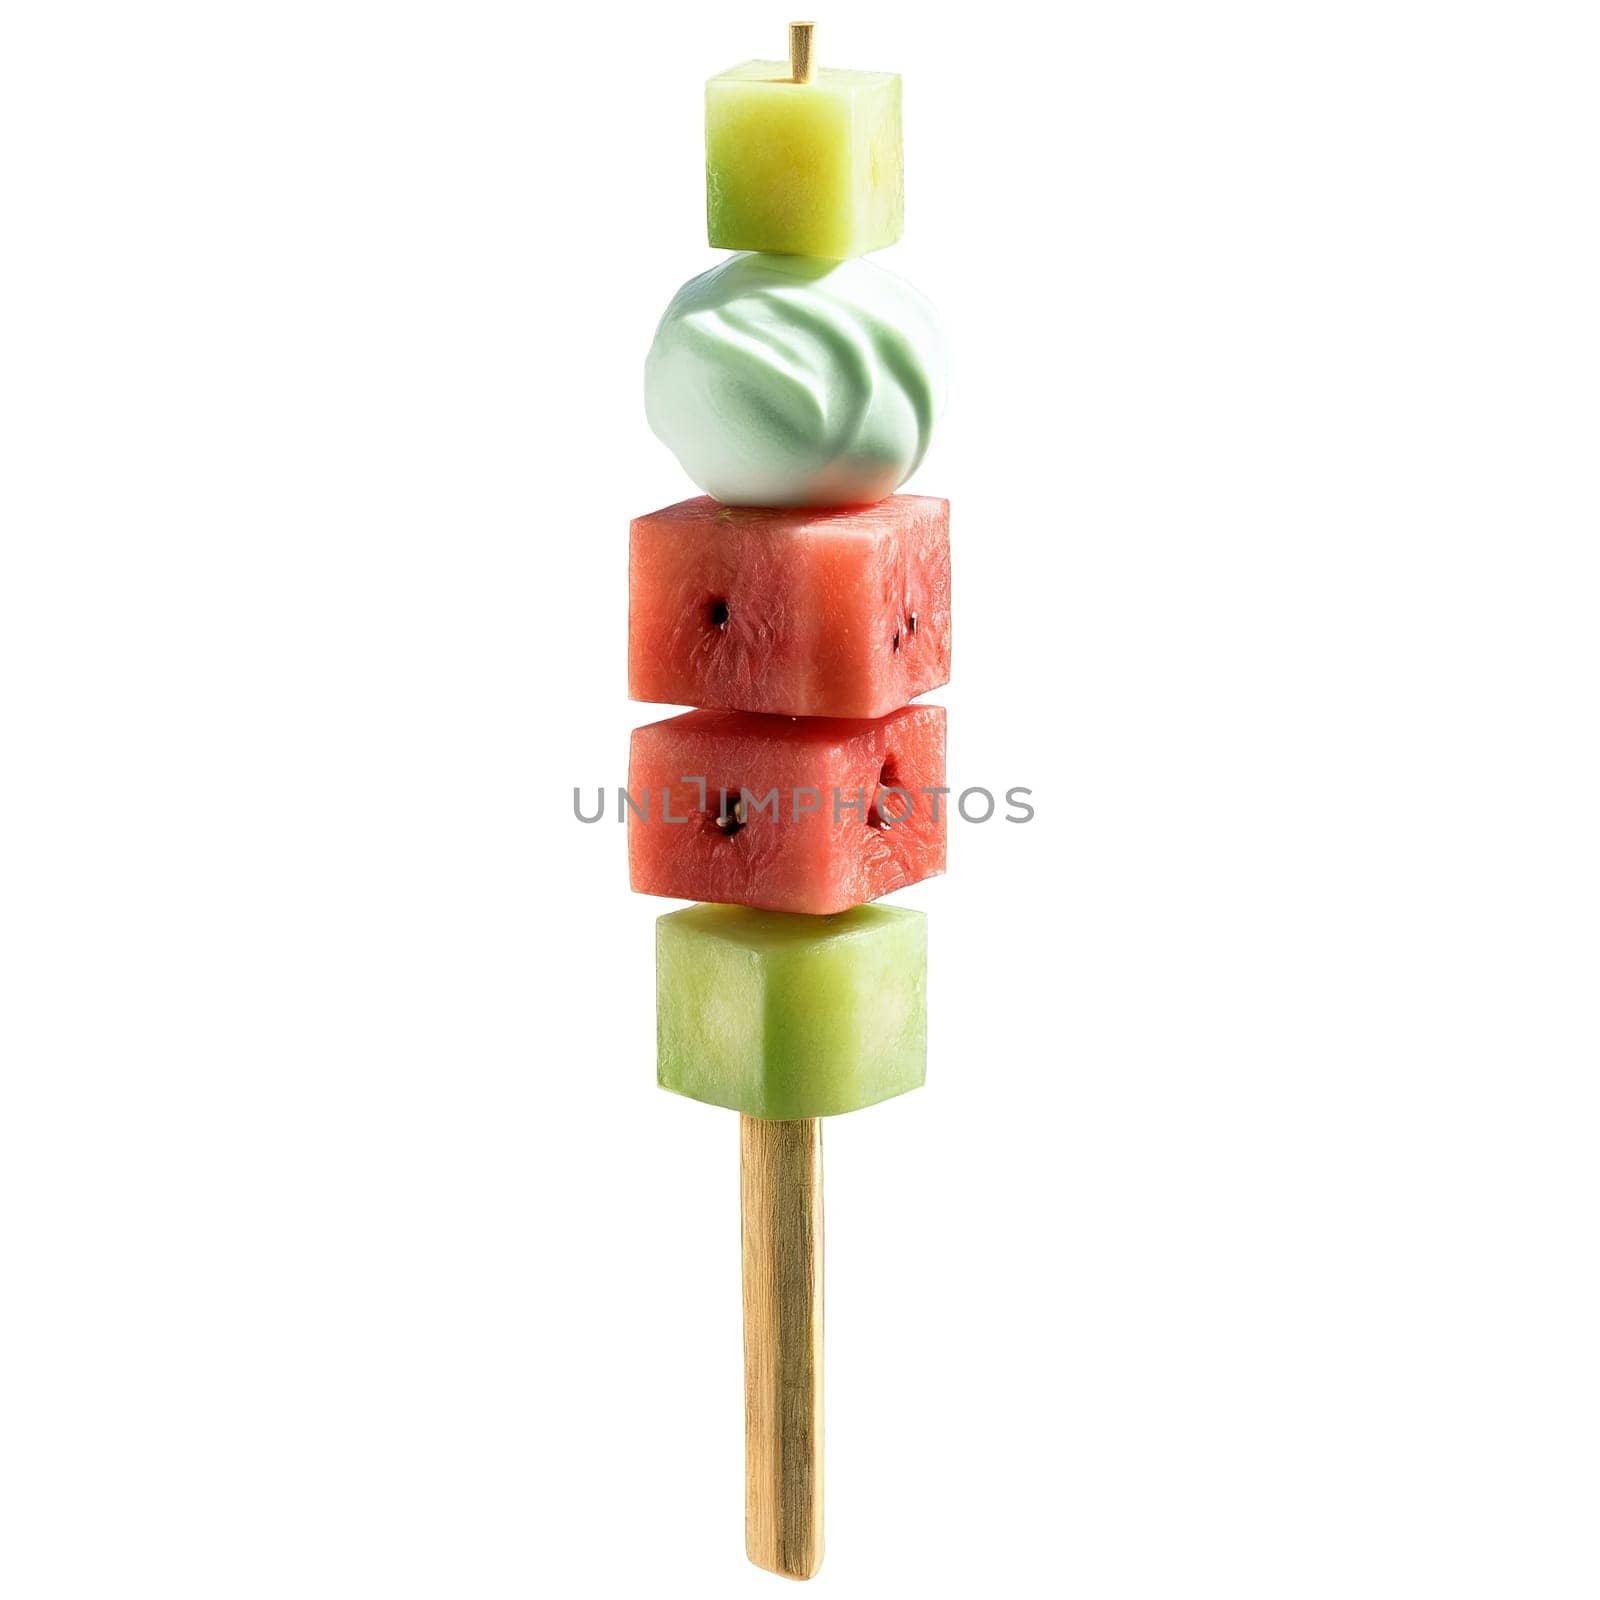 Breakfast fruit kebabs with cubes of watermelon honeydew and cantaloupe threaded onto skewers and served. close-up food, isolated on transparent background